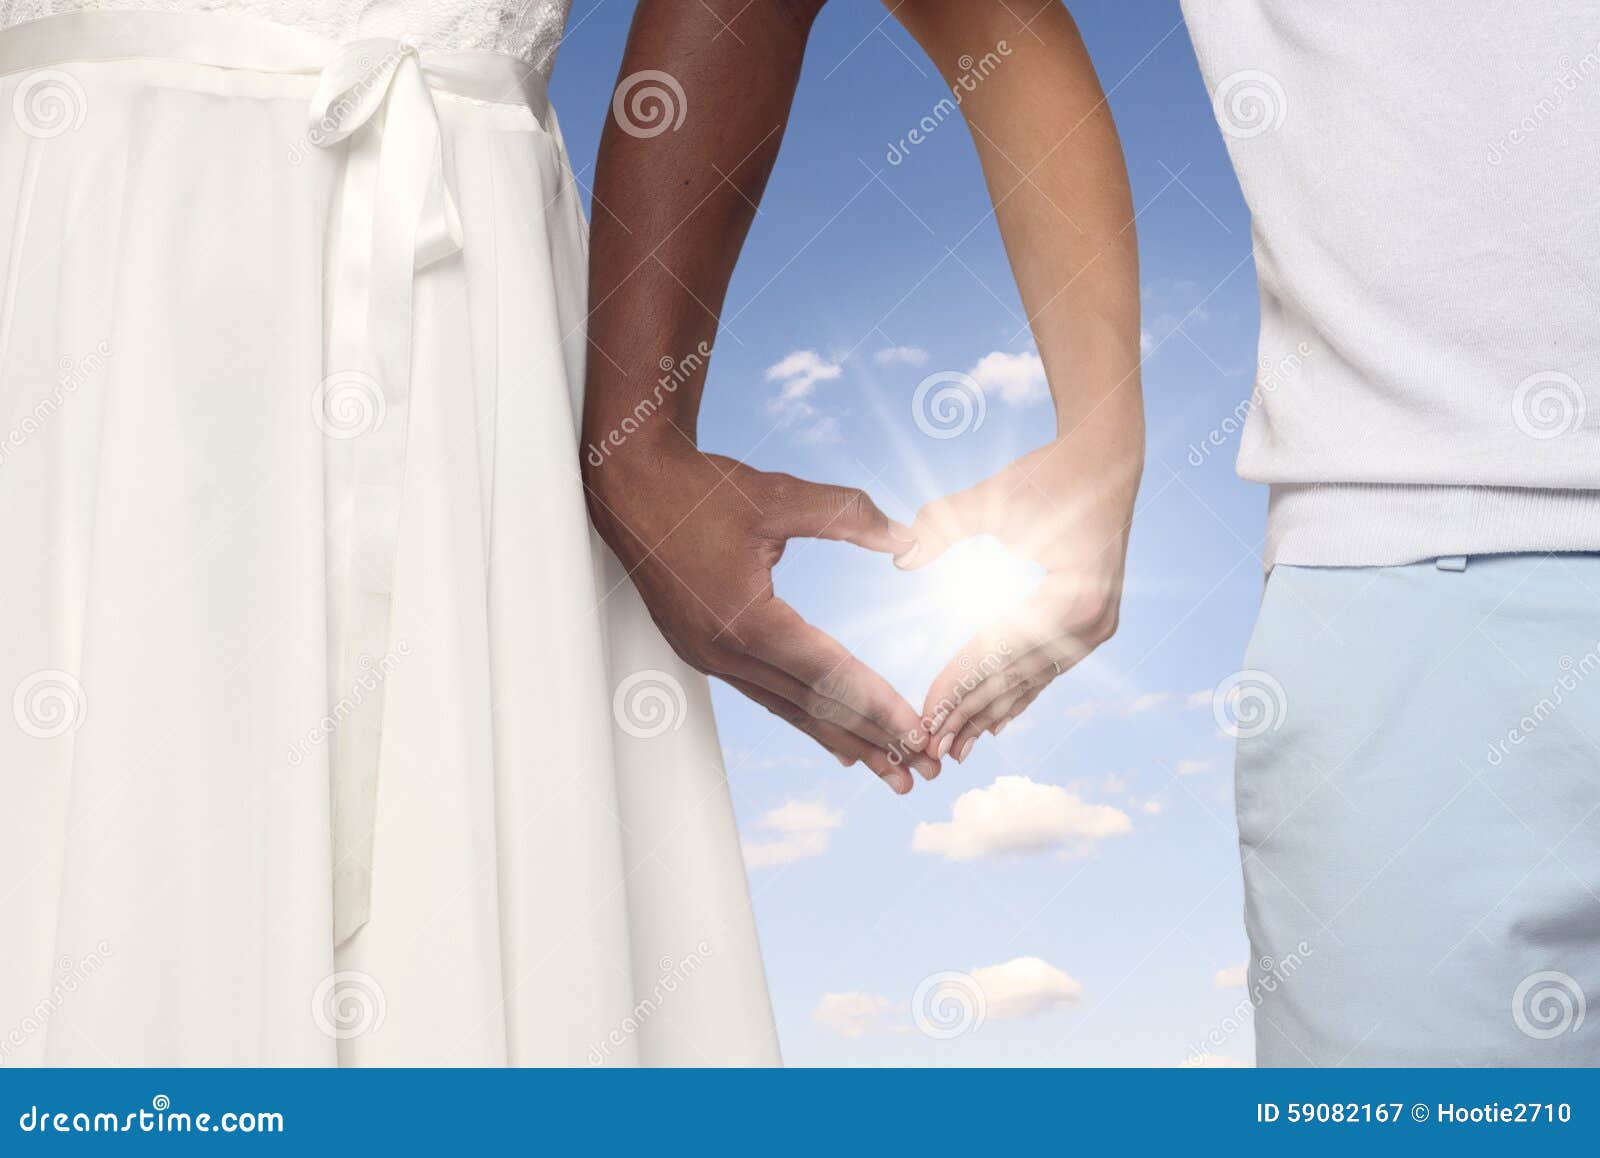 Couple Forming Heart Shaped Hands Together Stock Image Image Of Hands Couple 59082167